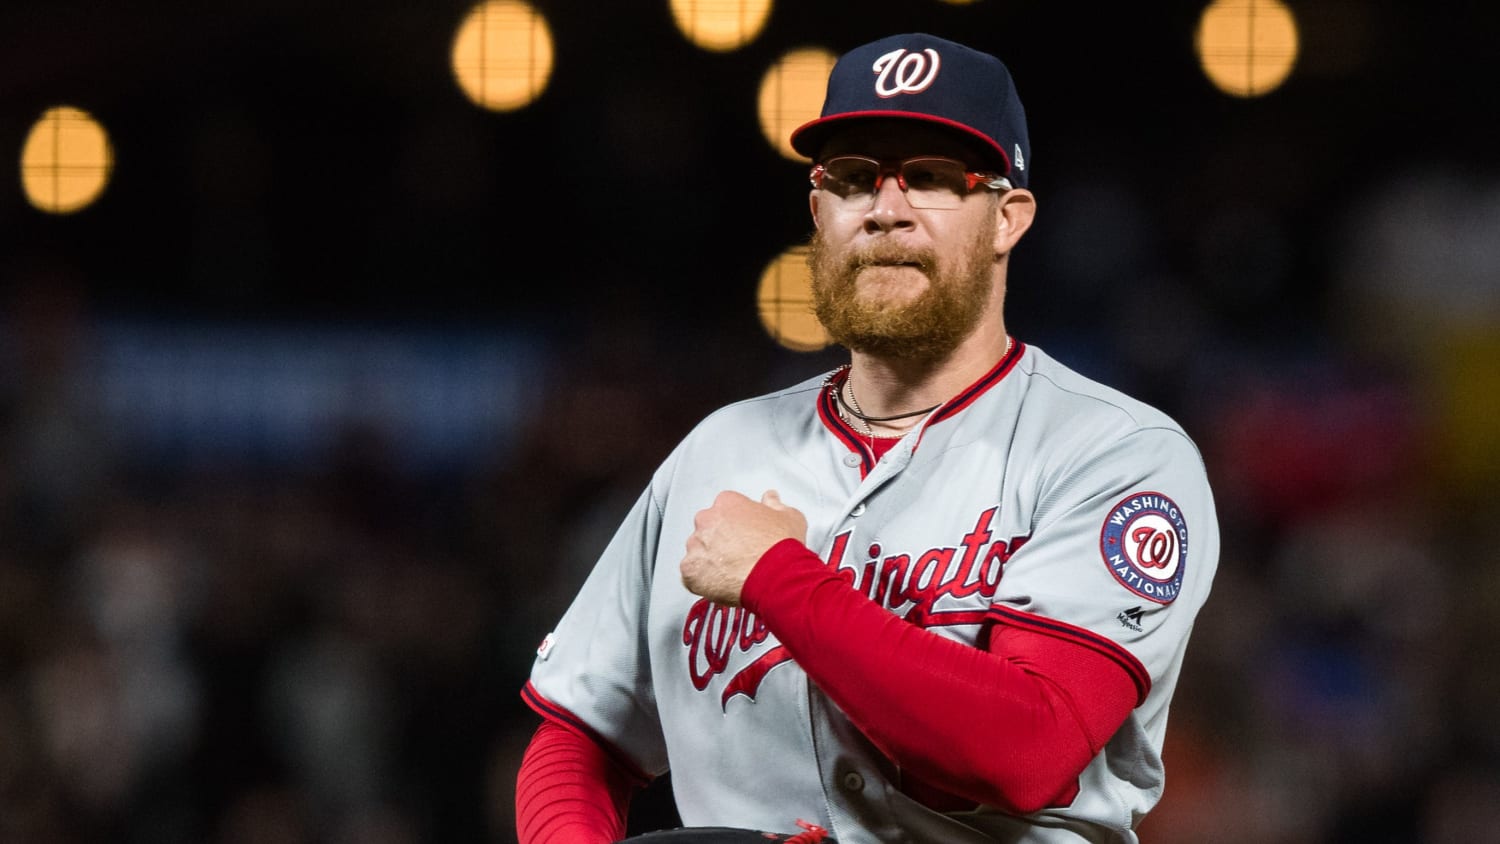 Sean Doolittle says Washington Nationals players will cover pay cuts for organization's minor leaguers